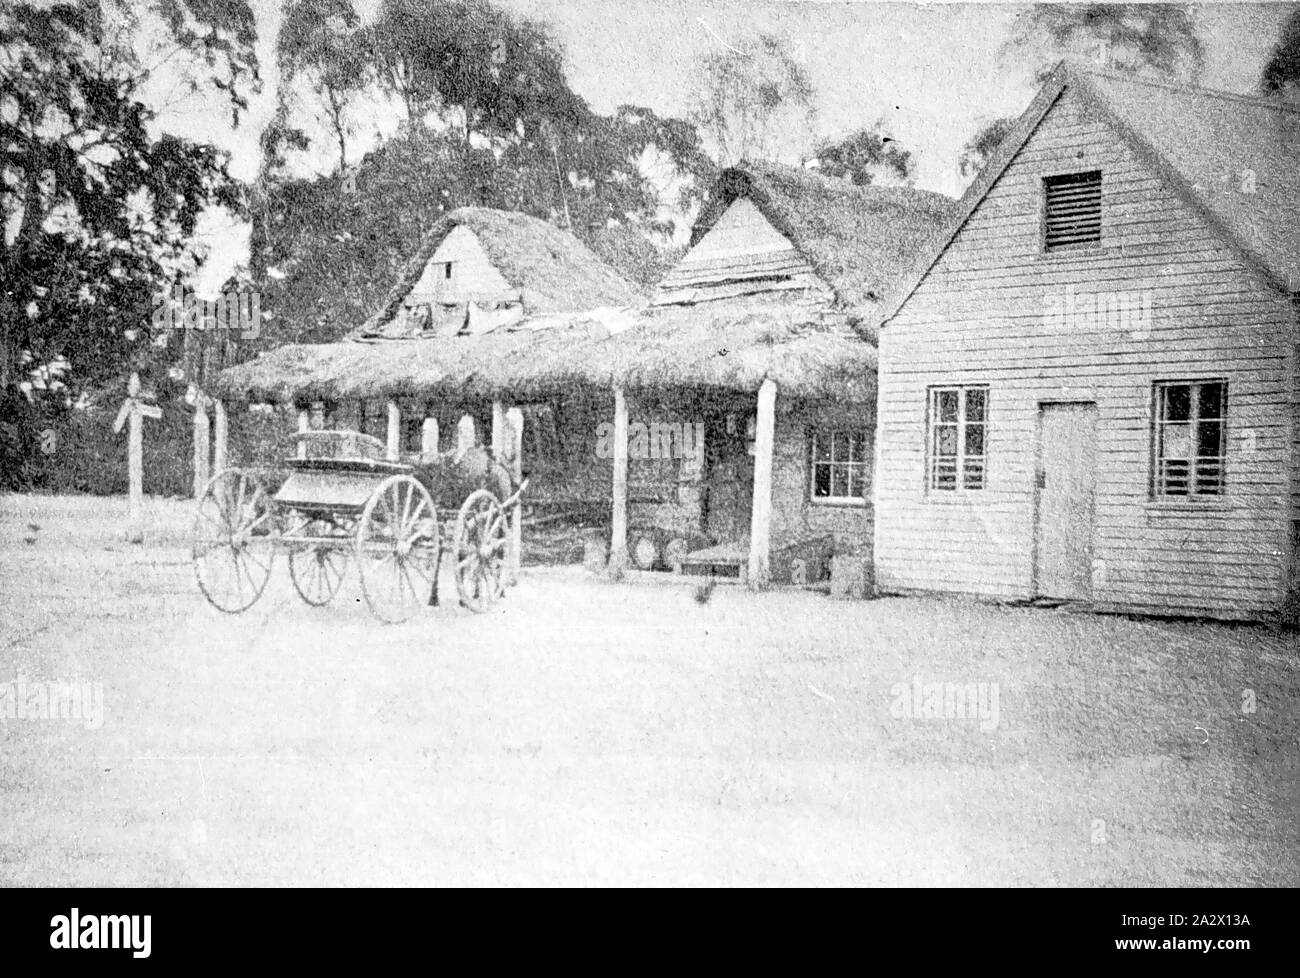 Negative - Eastville, Victoria, circa 1885, An early photograph of the Shootem Flying Inn with a thatched roof. There is a horse and cart in front of the inn Stock Photo